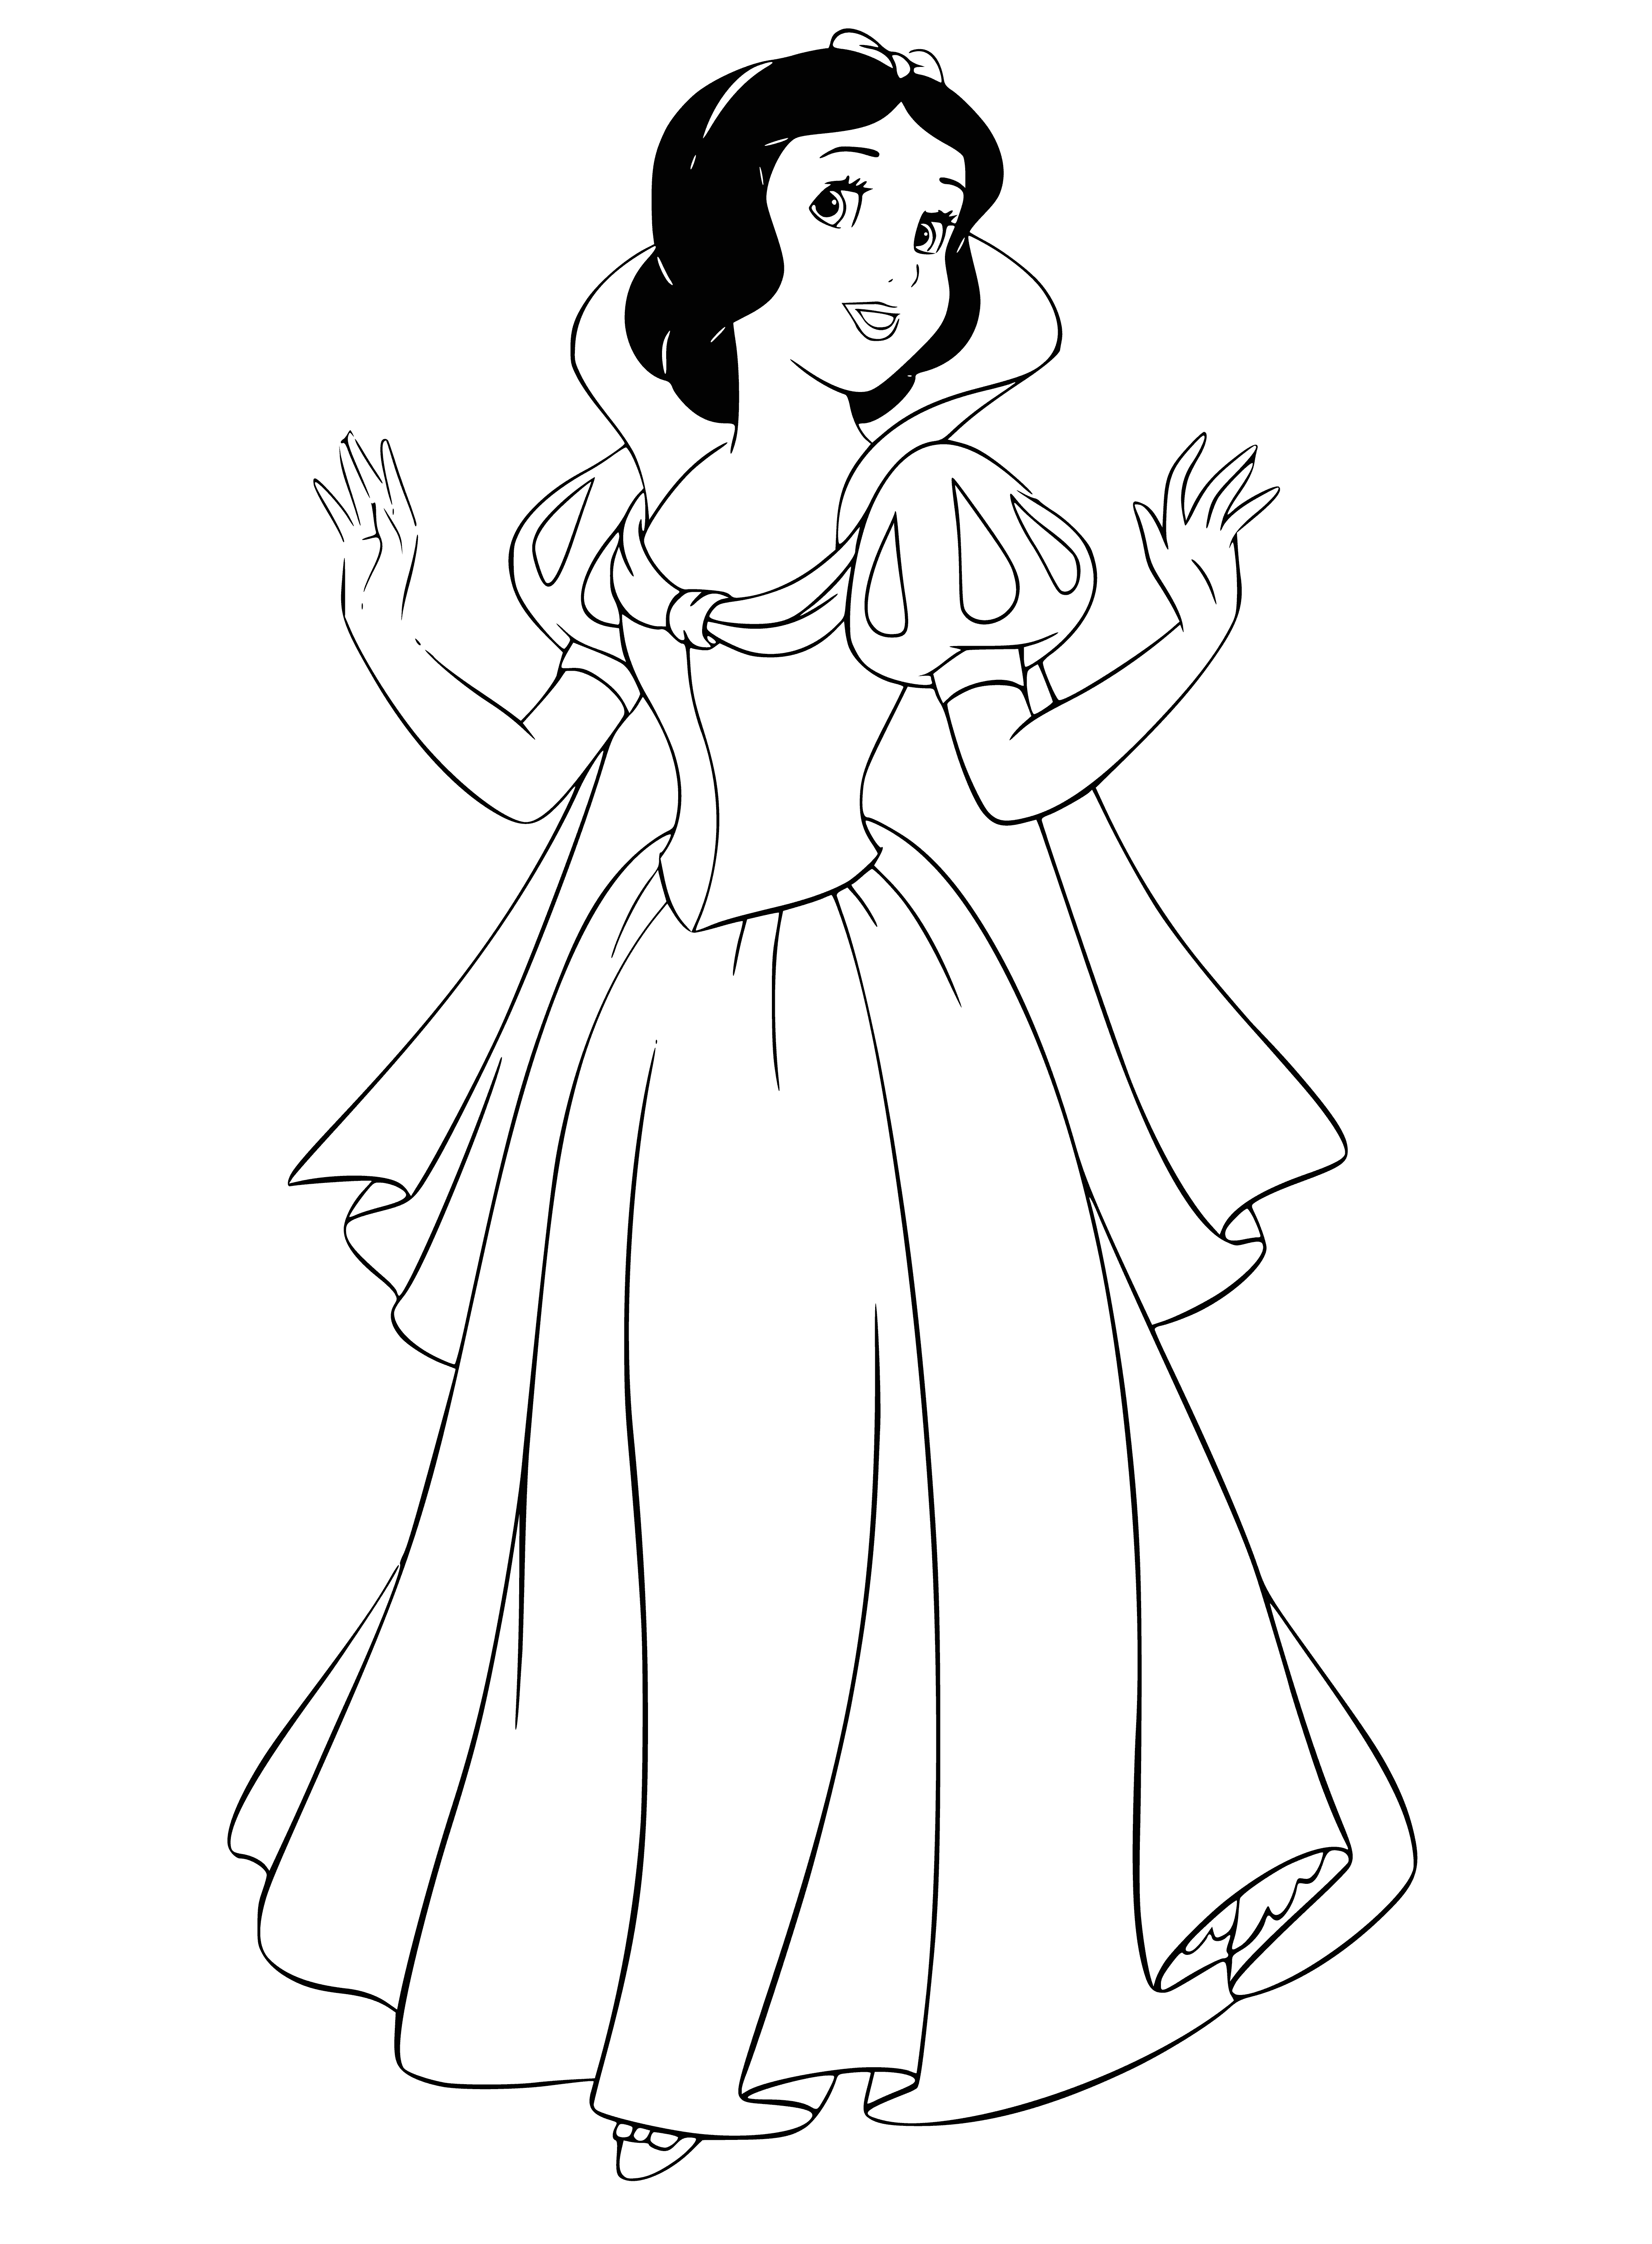 coloring page: Snow White stands before seven little men, her curly hair adorned with a red ribbon. She is dressed in a light blue dress and a white apron, looking at them kindly.